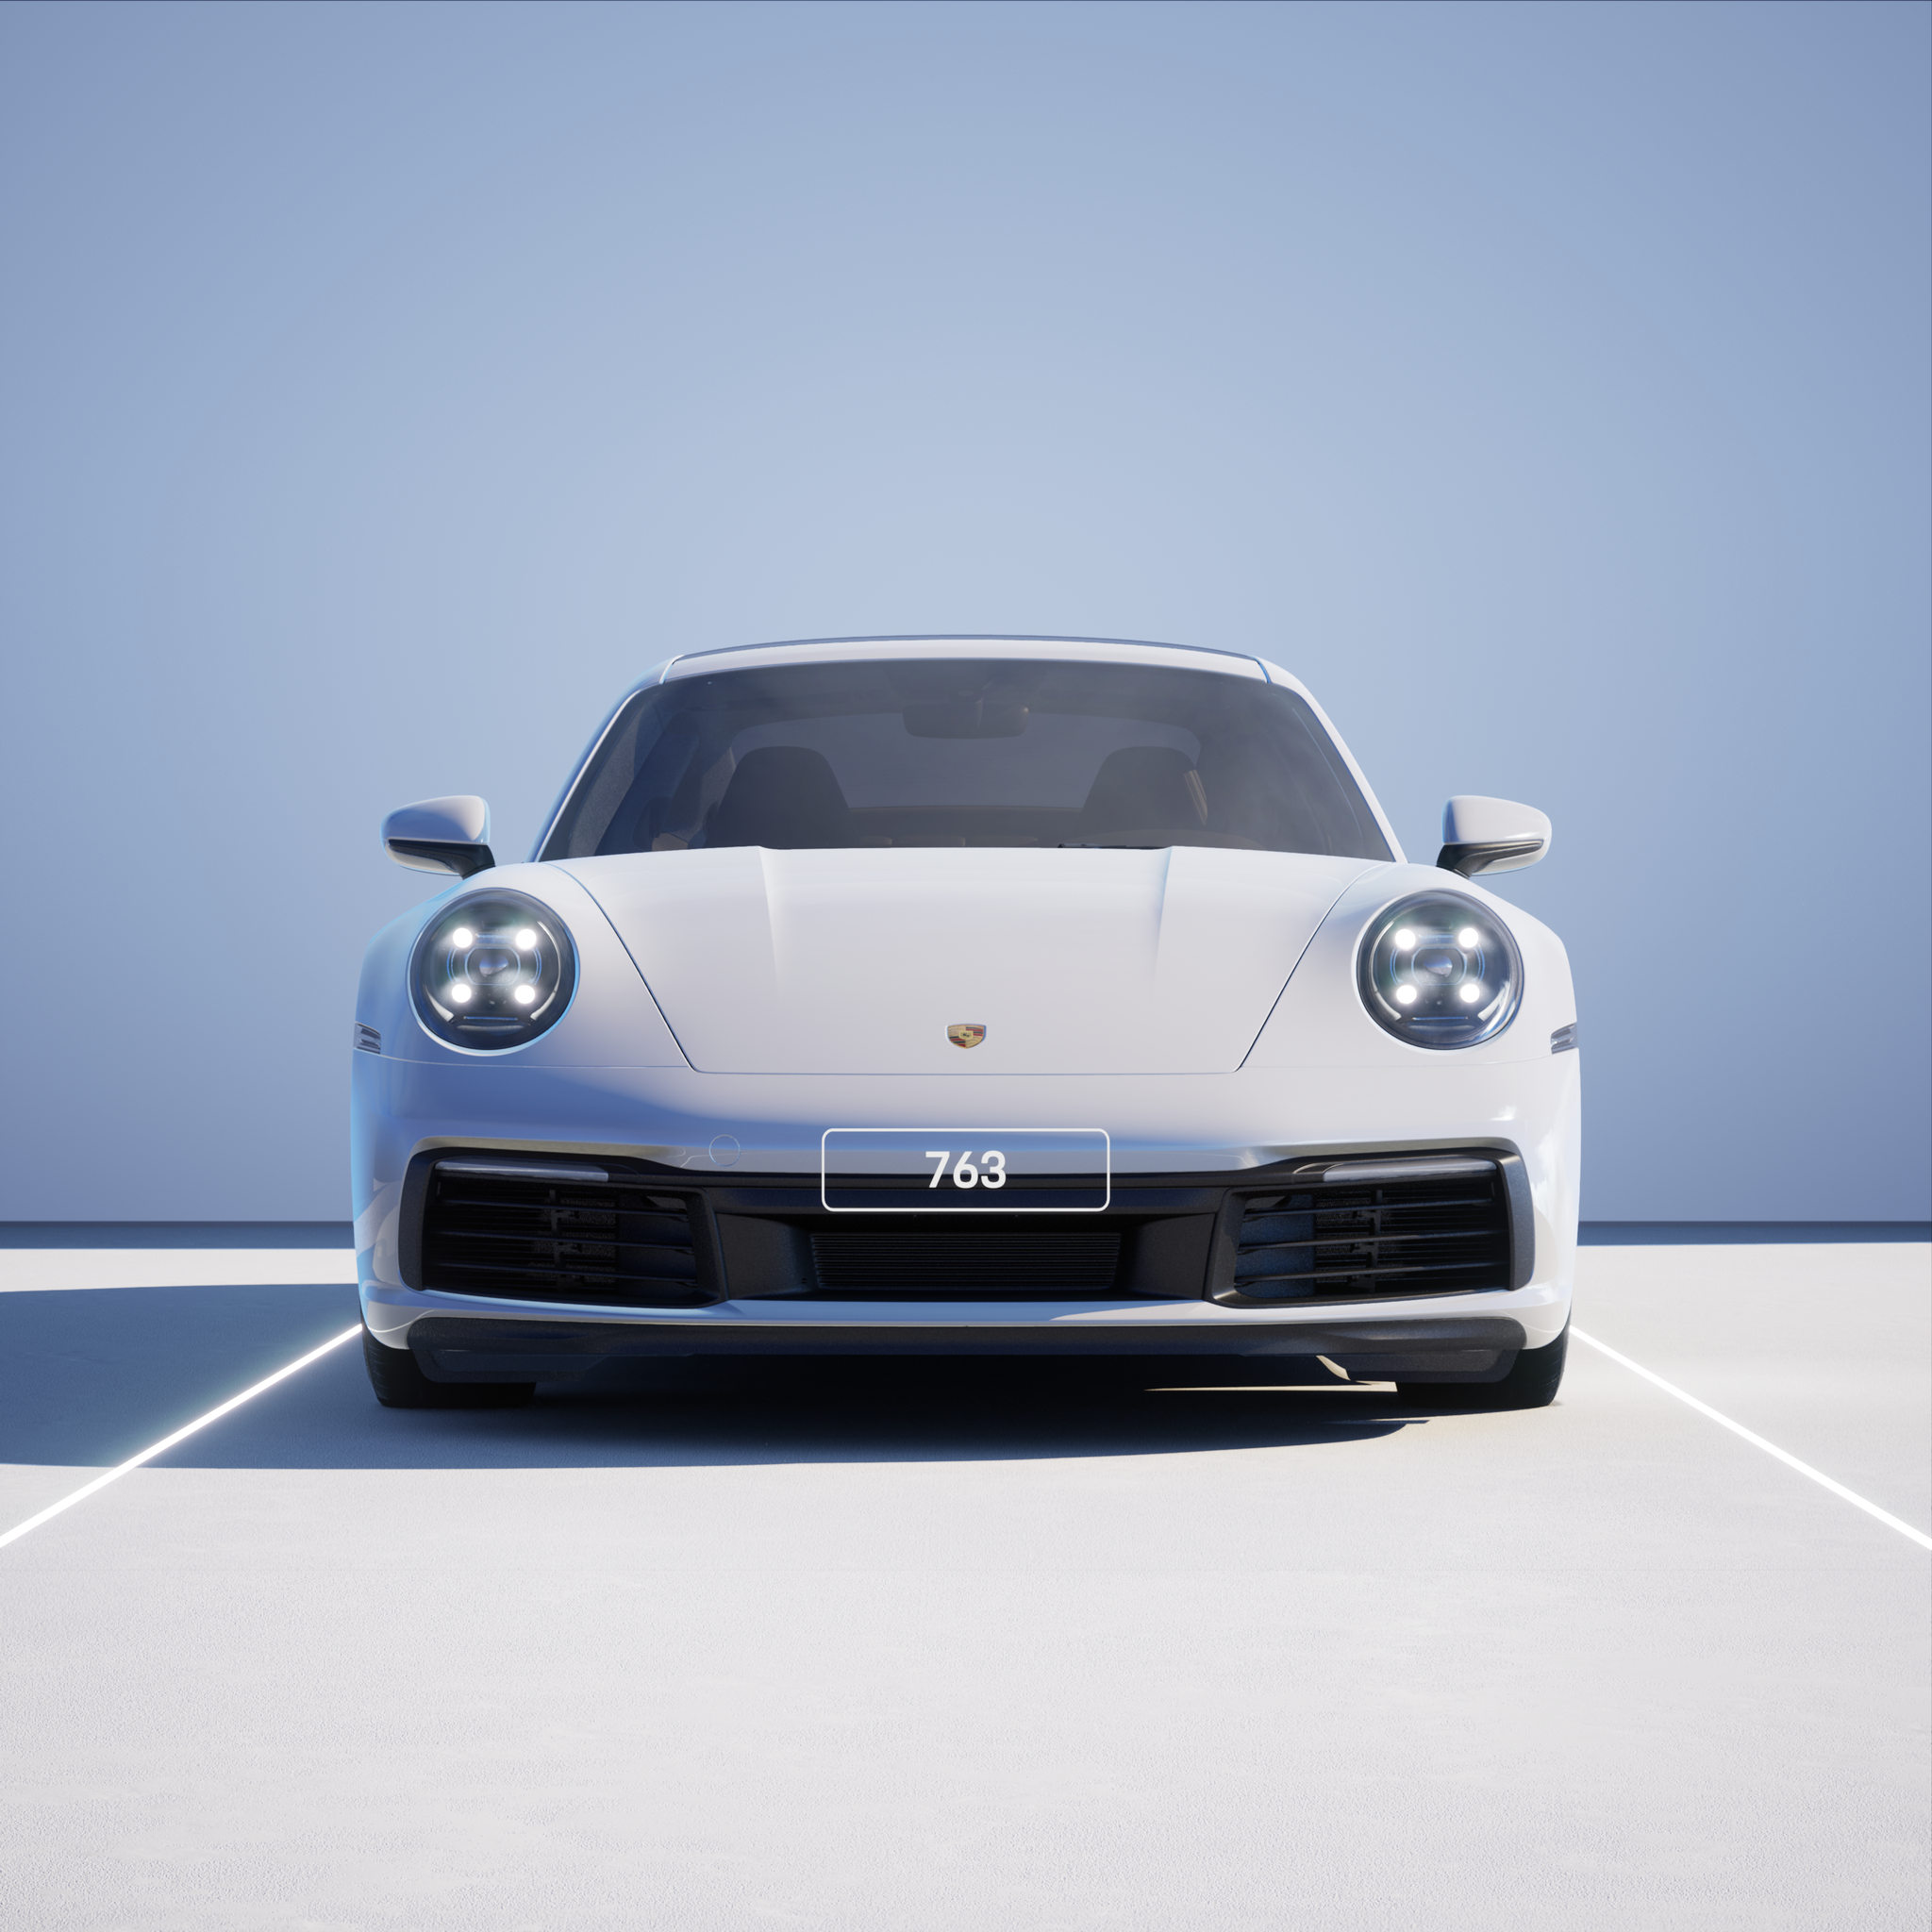 The PORSCHΞ 911 763 image in phase